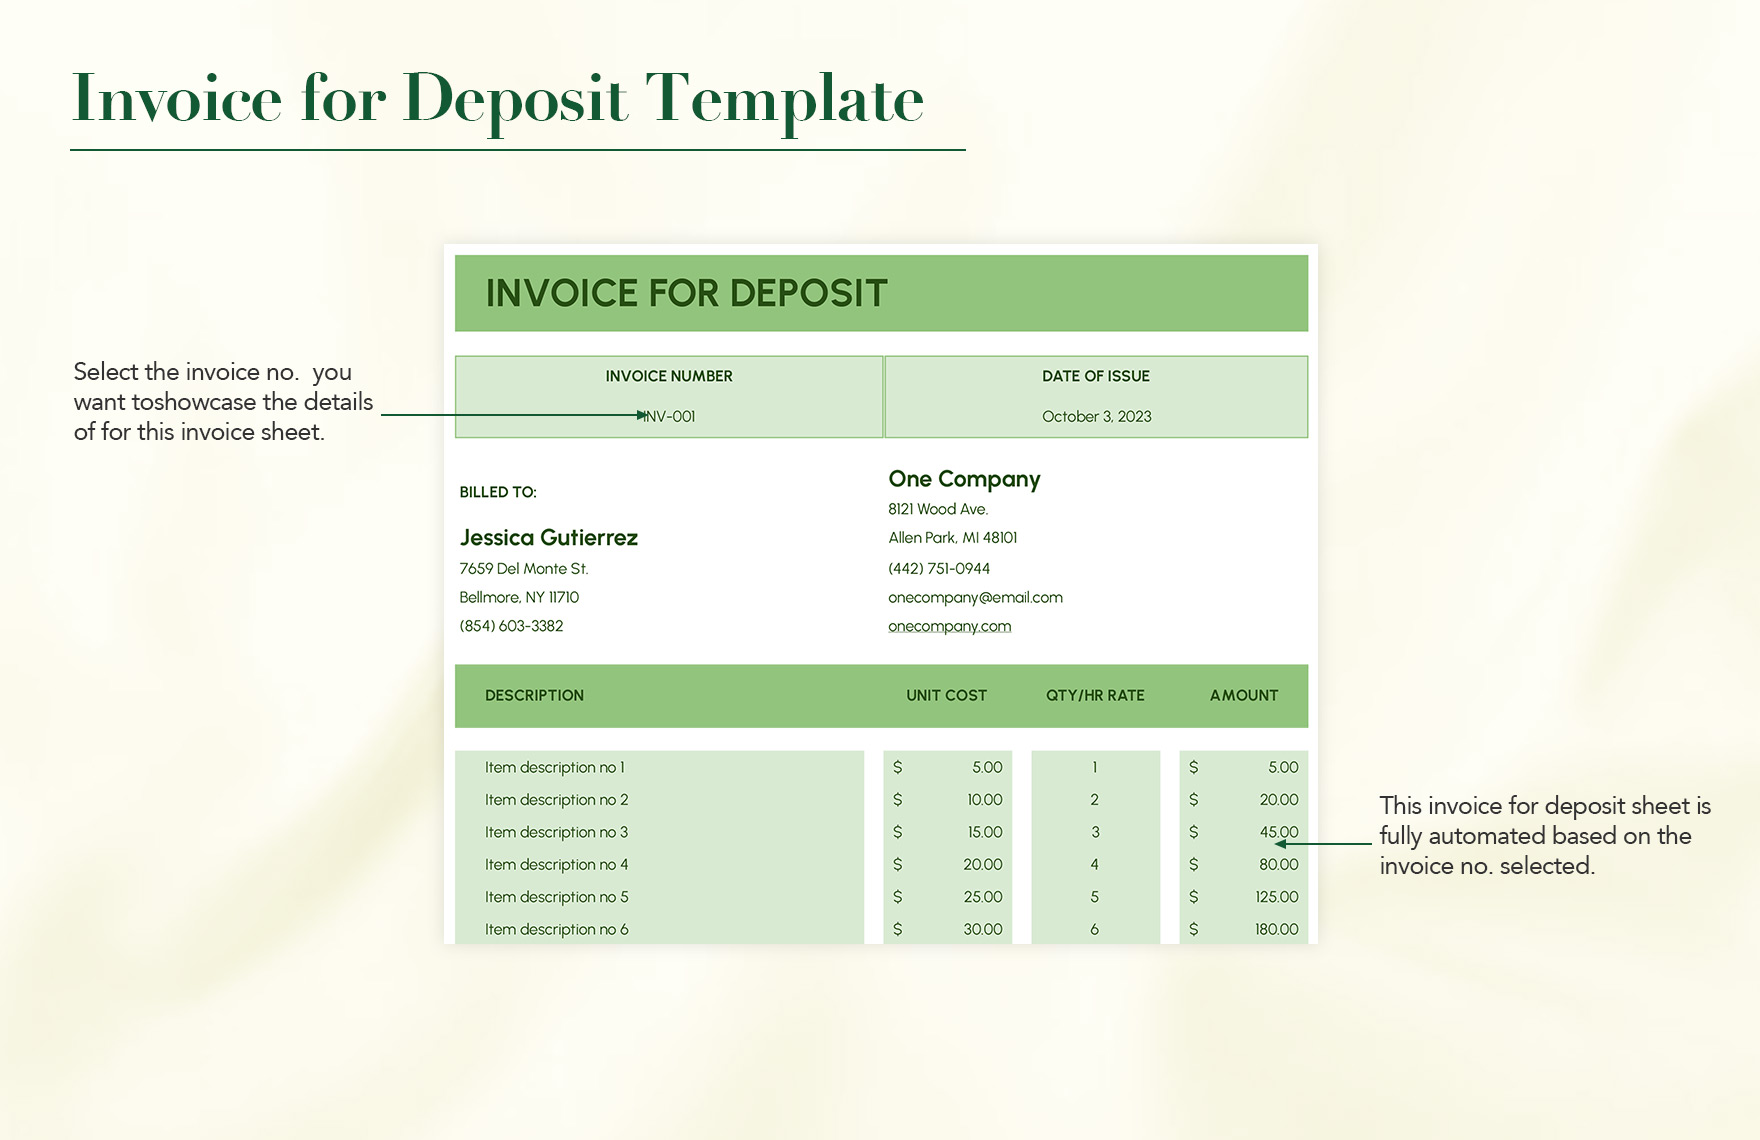 Invoice for Deposit Template